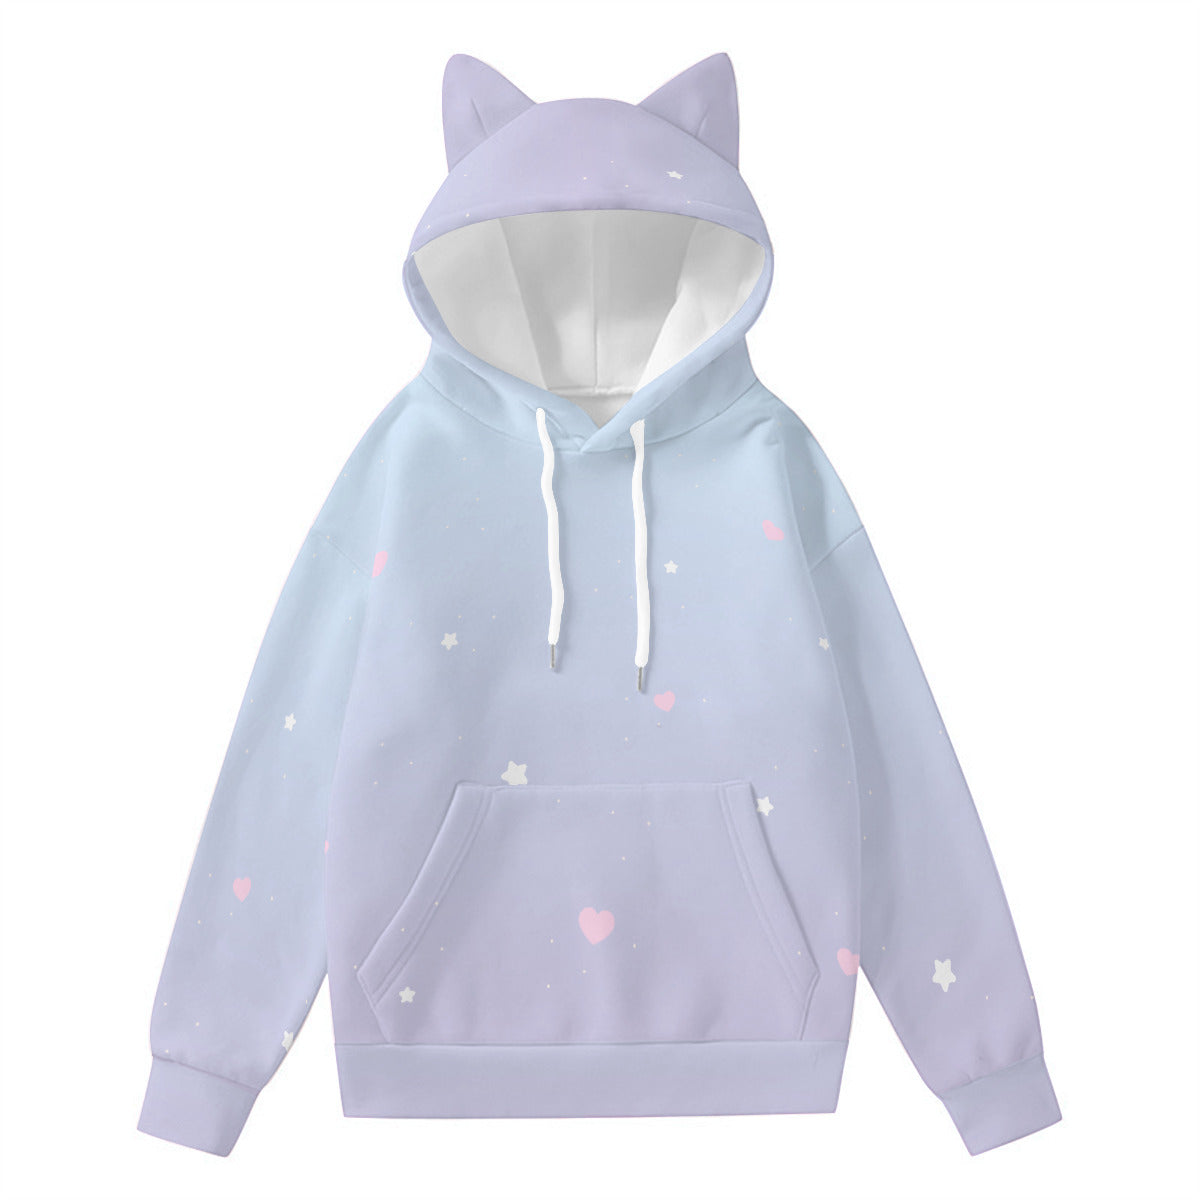 Toothache Logo Pastel Pullover Hoodie with Cat Ears